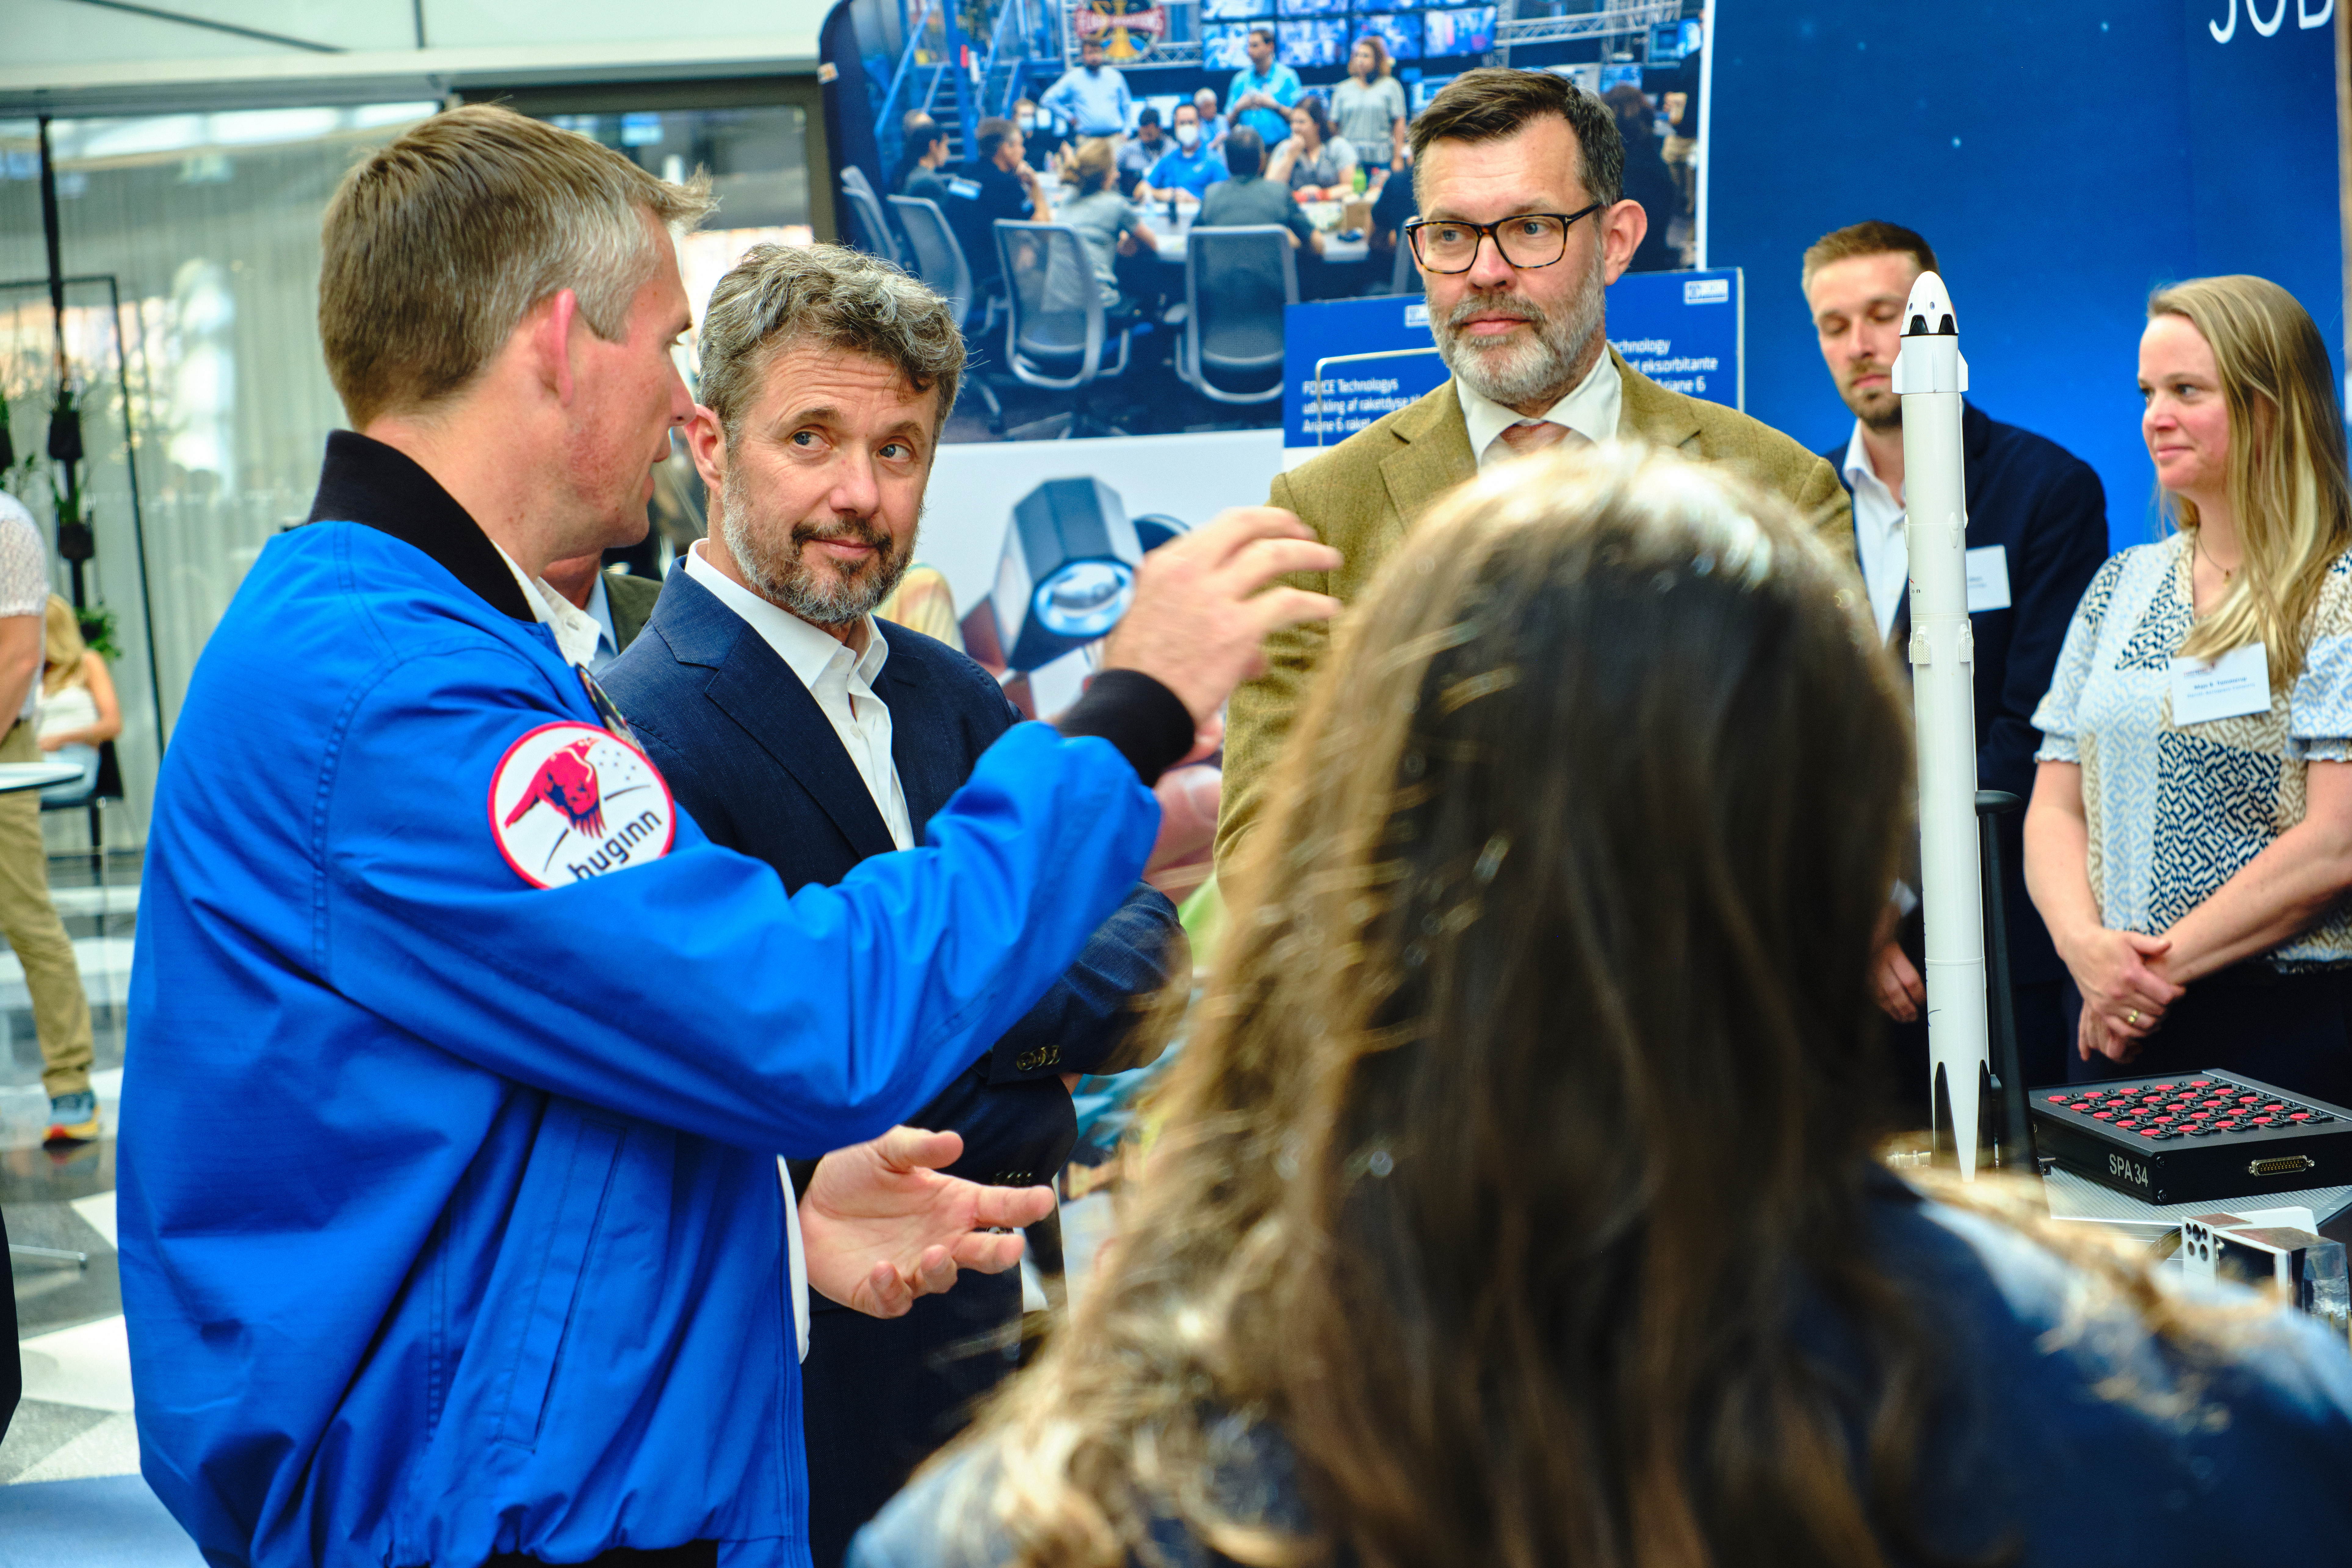 HRH Crown Prince Frederik has the Falcon 9 rocket due to launch astronaut Andreas Mogensen from Florida in August 2023 explained. The model rocket has is on loan from the Aarhus Space Centre in AU building 1520. Photo: DI